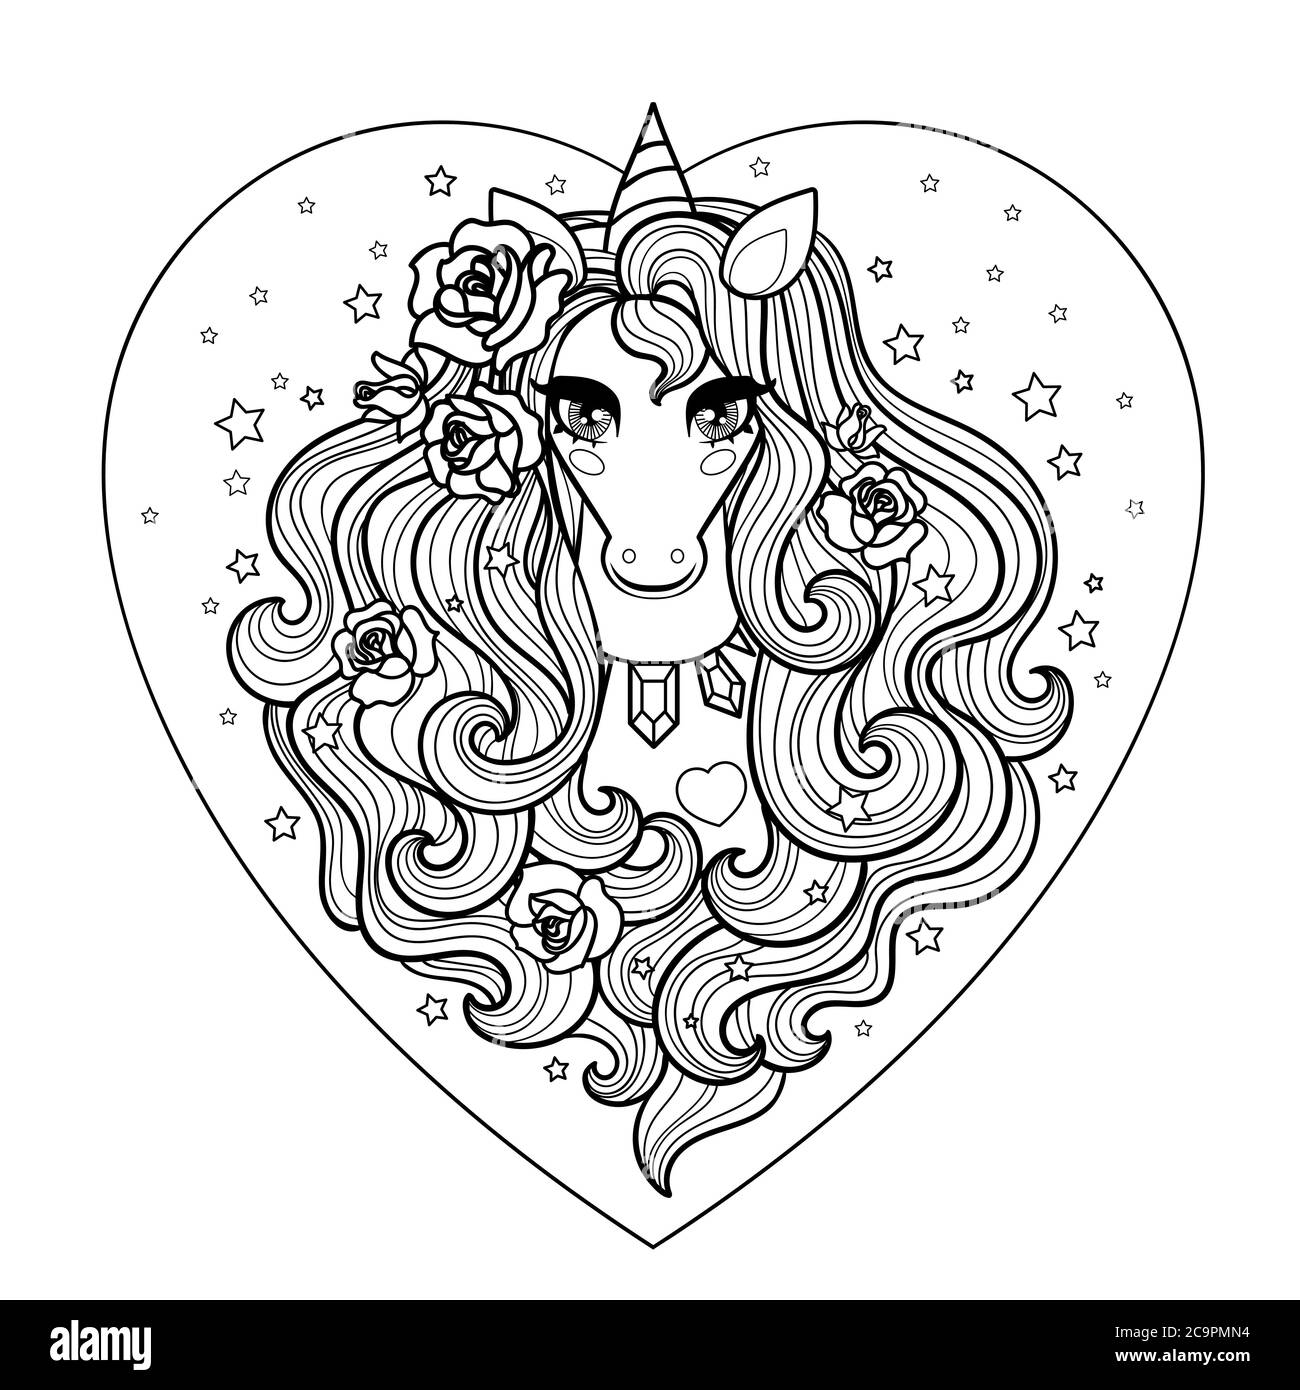 Unicorn head with long mane and roses. Linear art. Black and white image. For coloring books prints, posters, tattoos, postcards, stickers. Vector ill Stock Vector